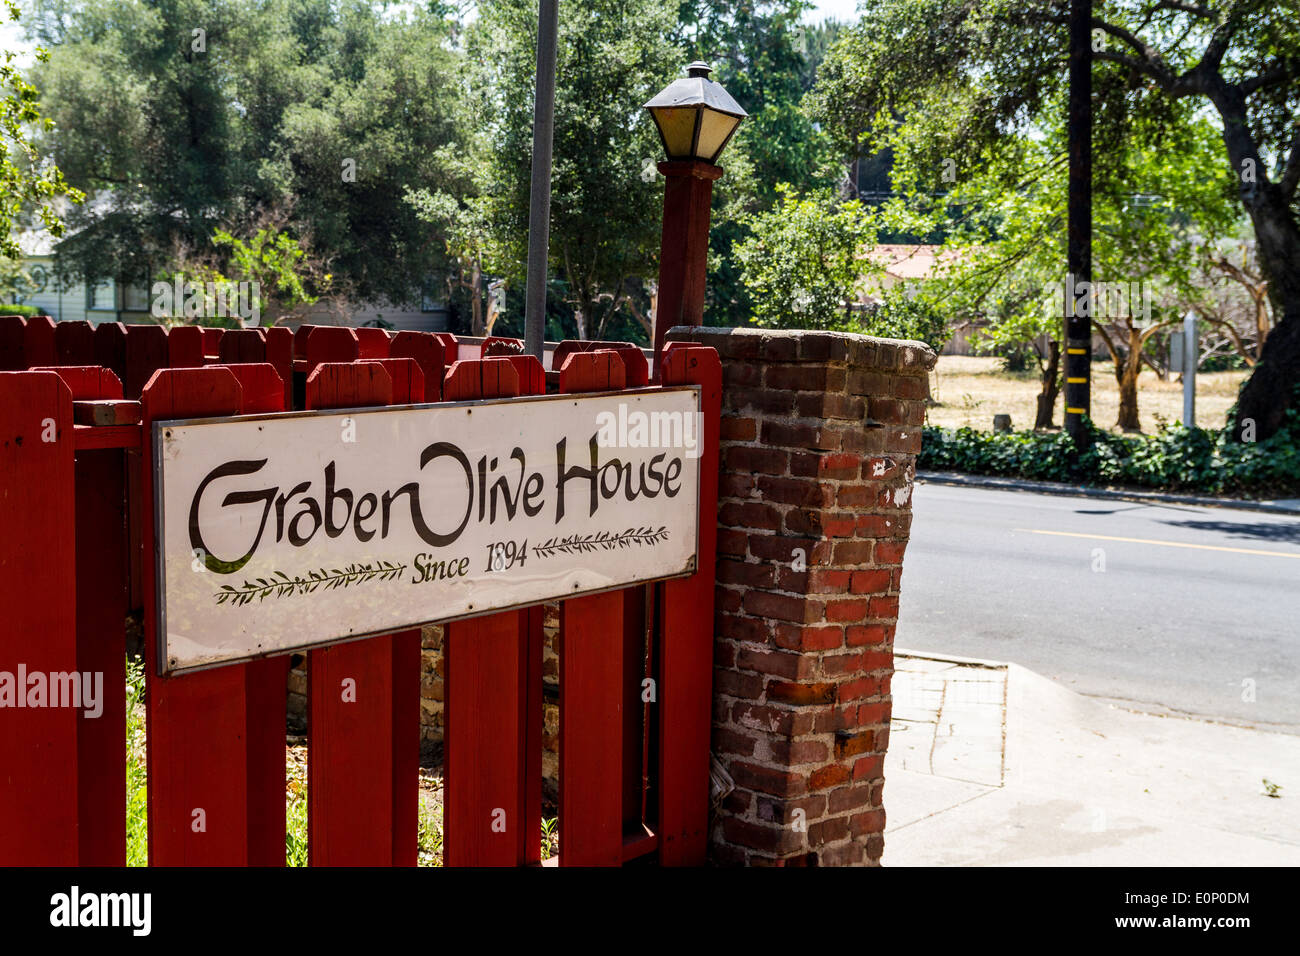 Graber Olive house in Ontario California Stock Photo